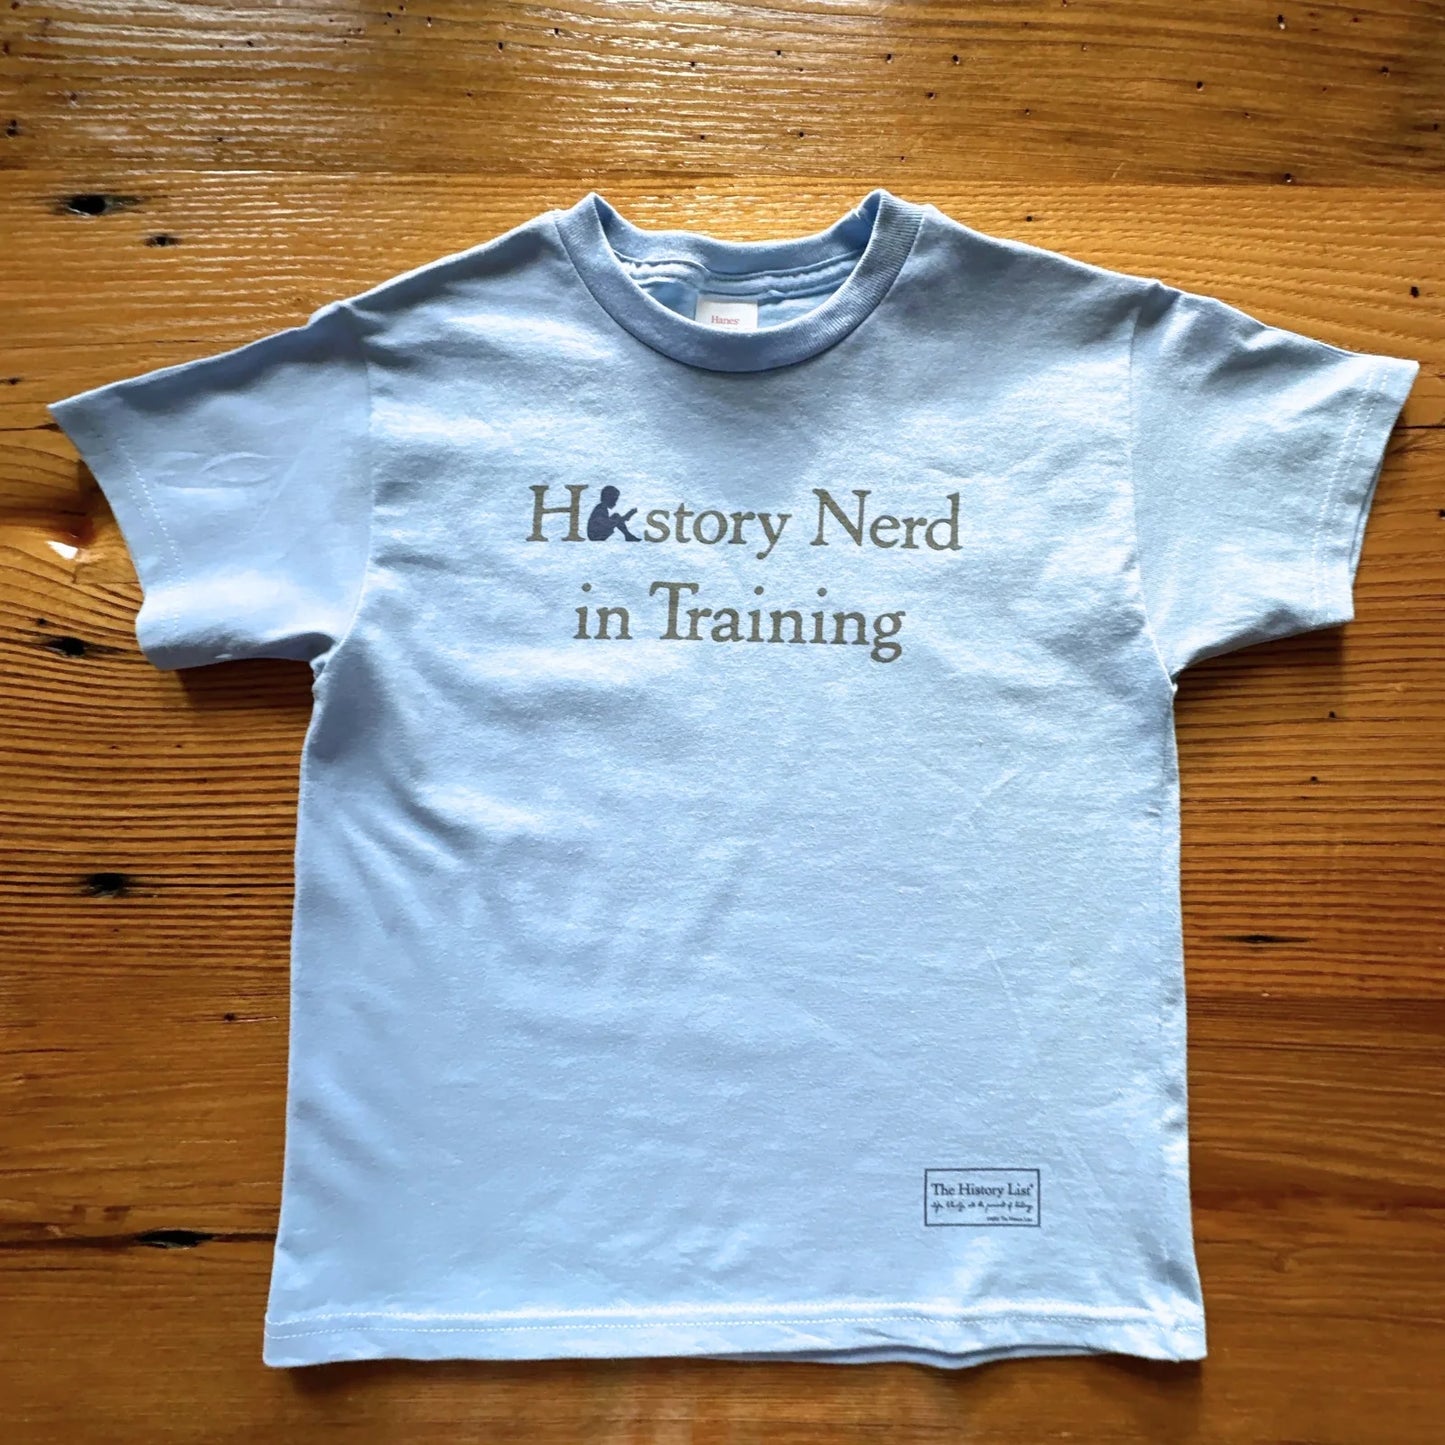 HISTORY NERD® in Training shirt in youth sizes - Light Blue from The History List store